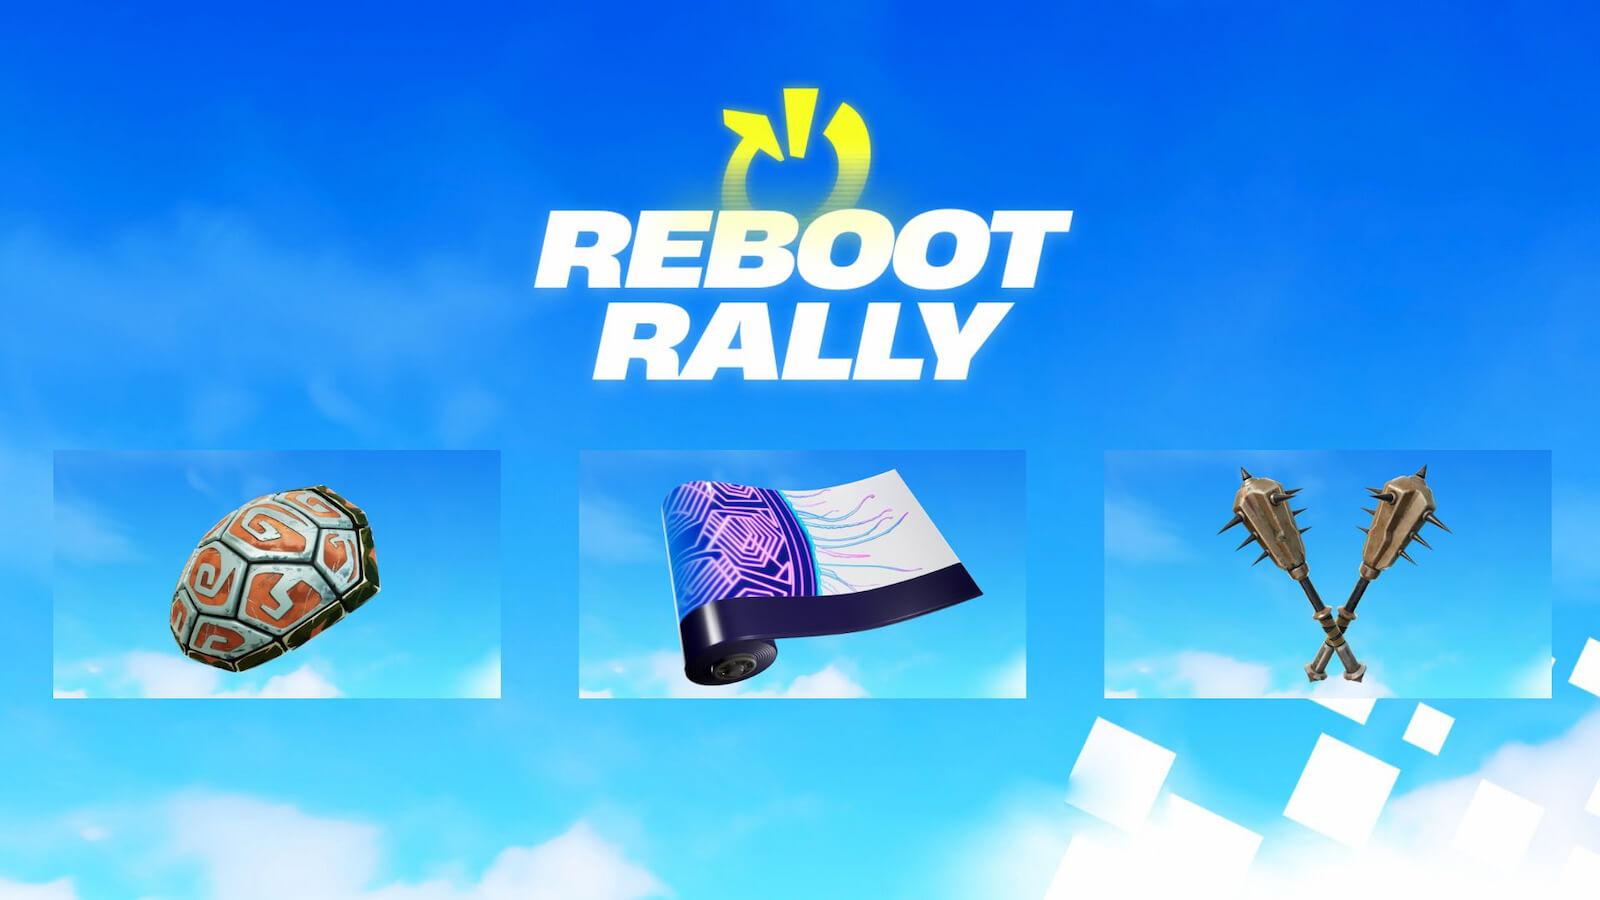 Fortnite Reboot Rally event